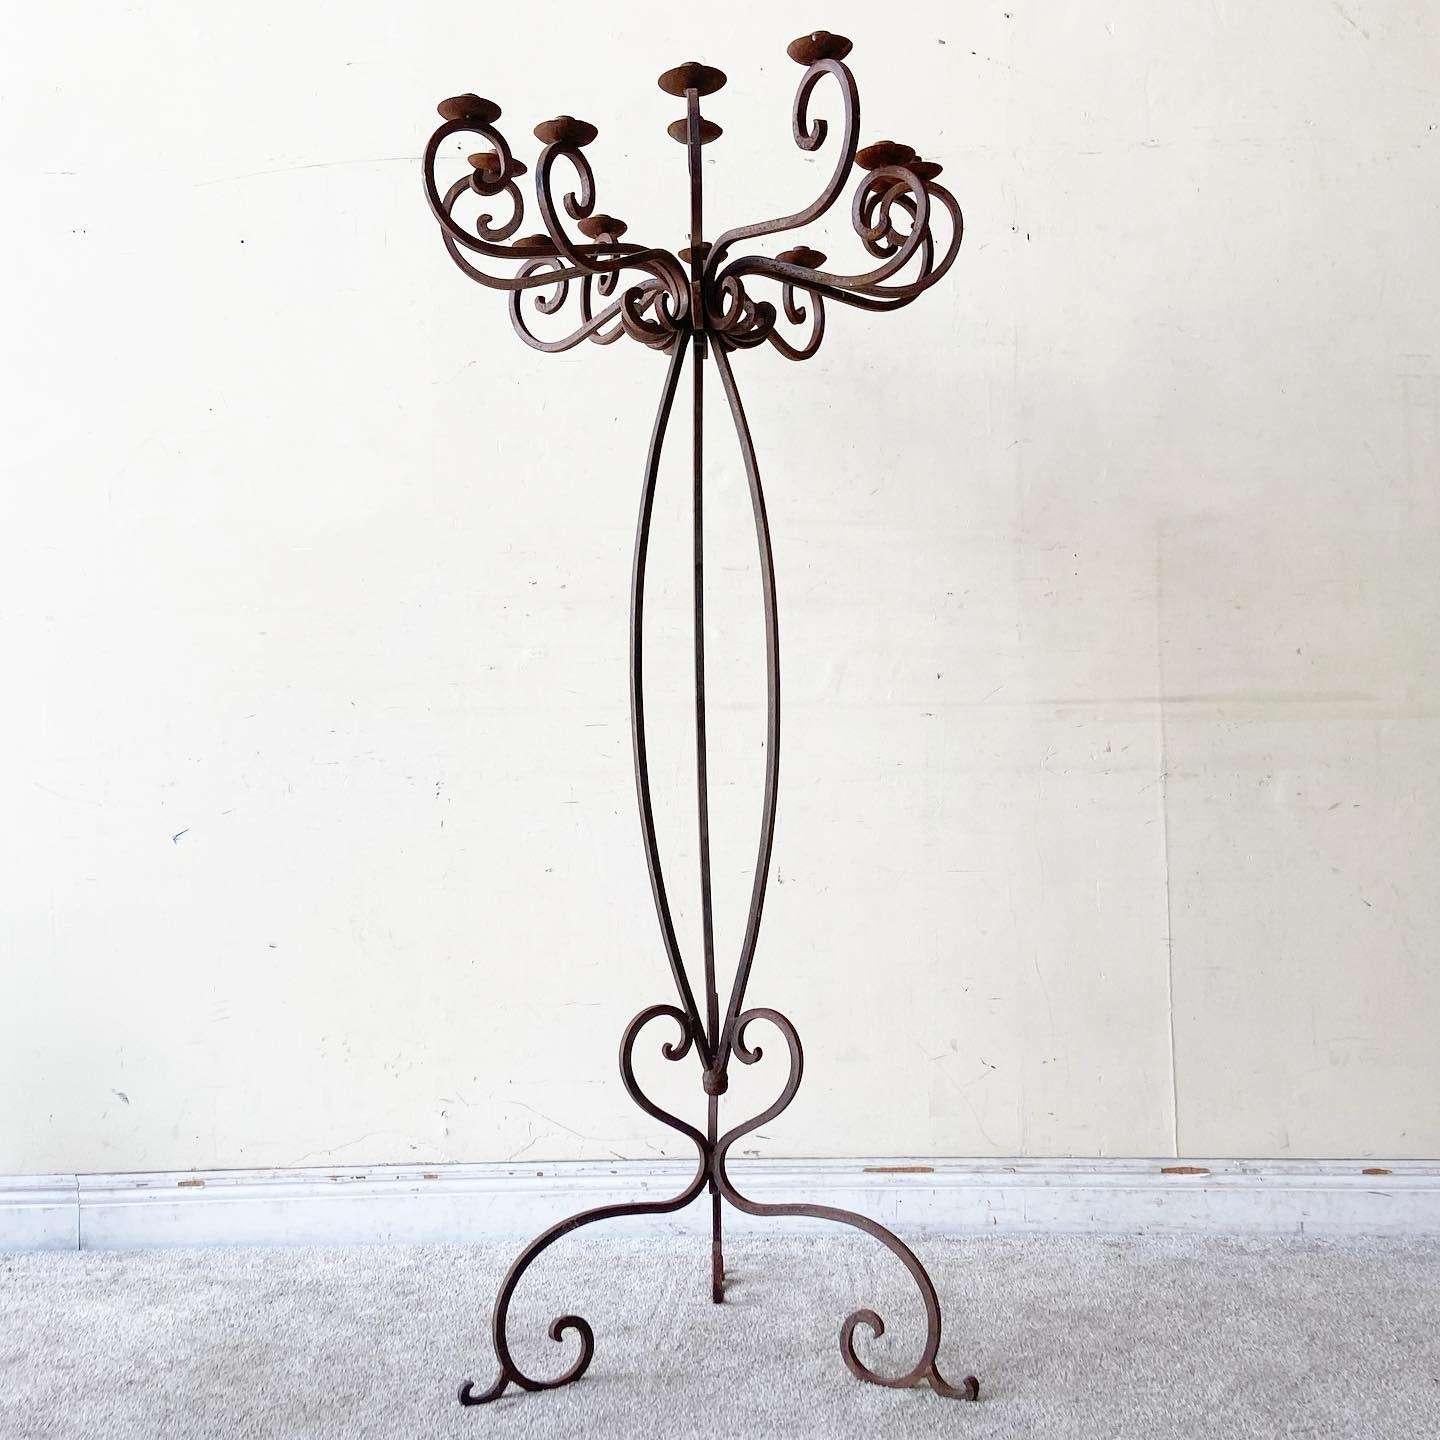 Amazing vintage Victorian style 13 cup candelabra. Features a black finish which has weathered and pitting consistently throughout the entire piece. Displays 13 ornate curved candle cups.
